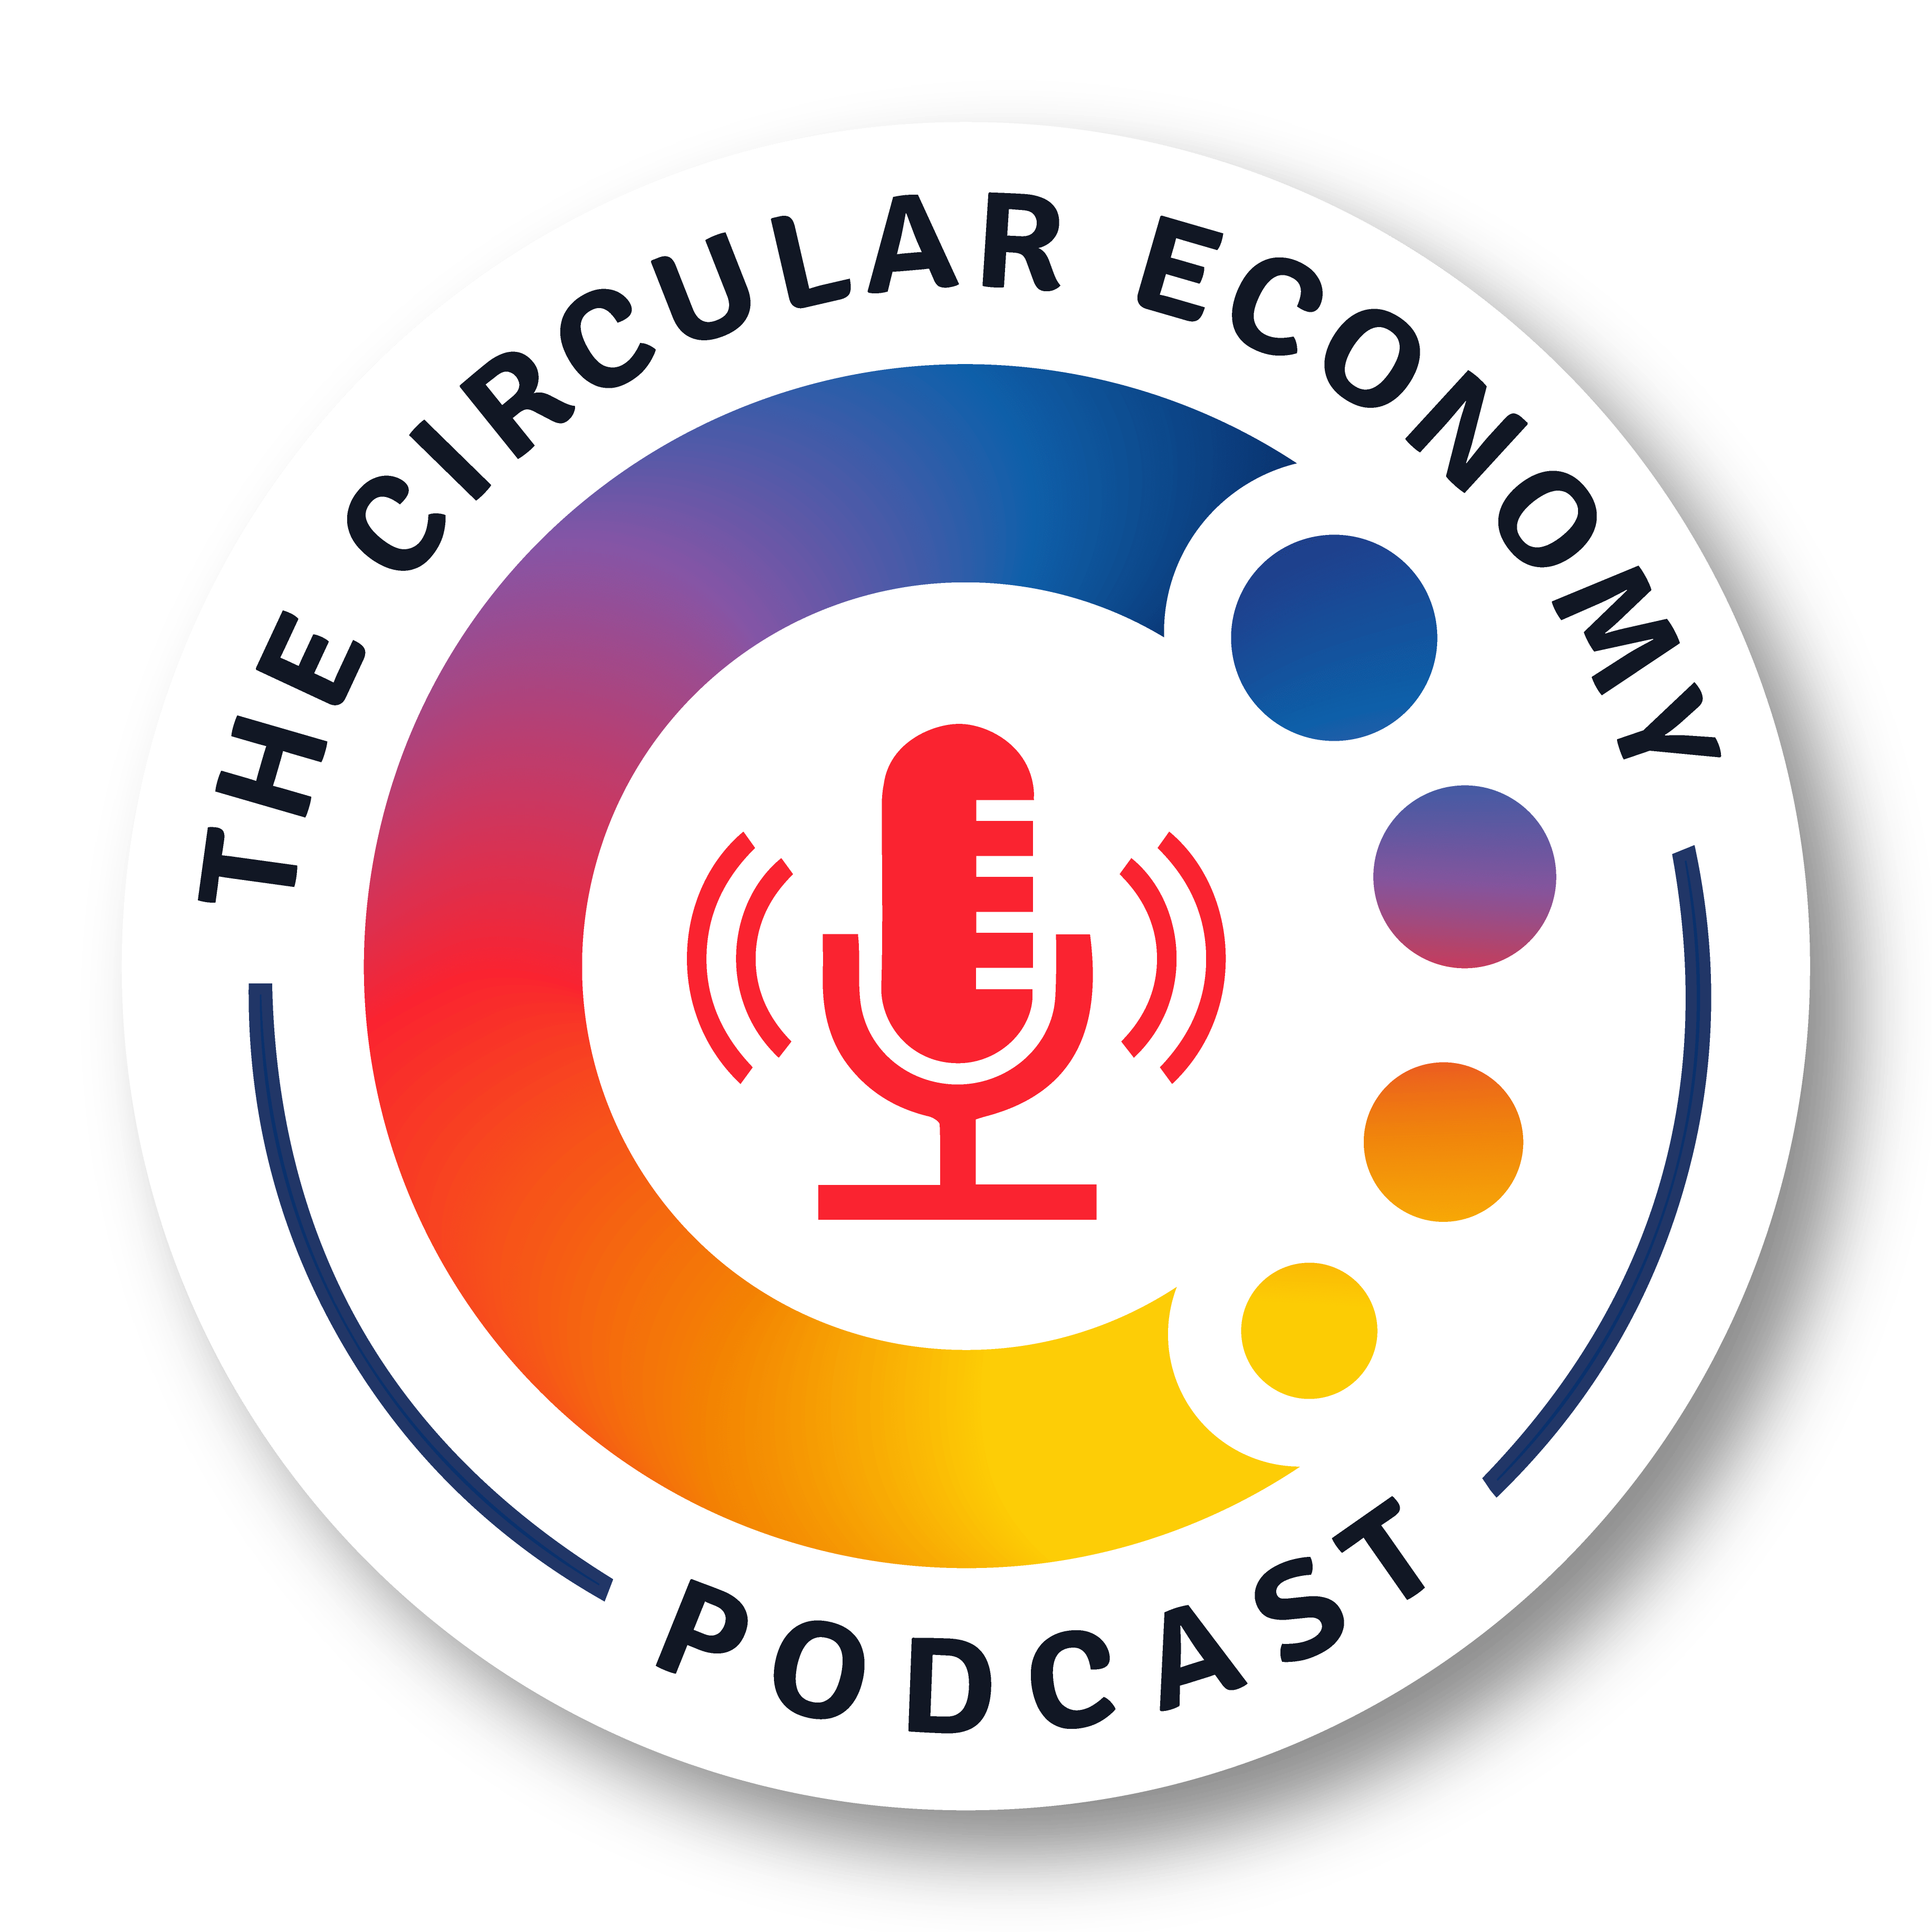 Circular Economy Podcast with Catherine Weetman